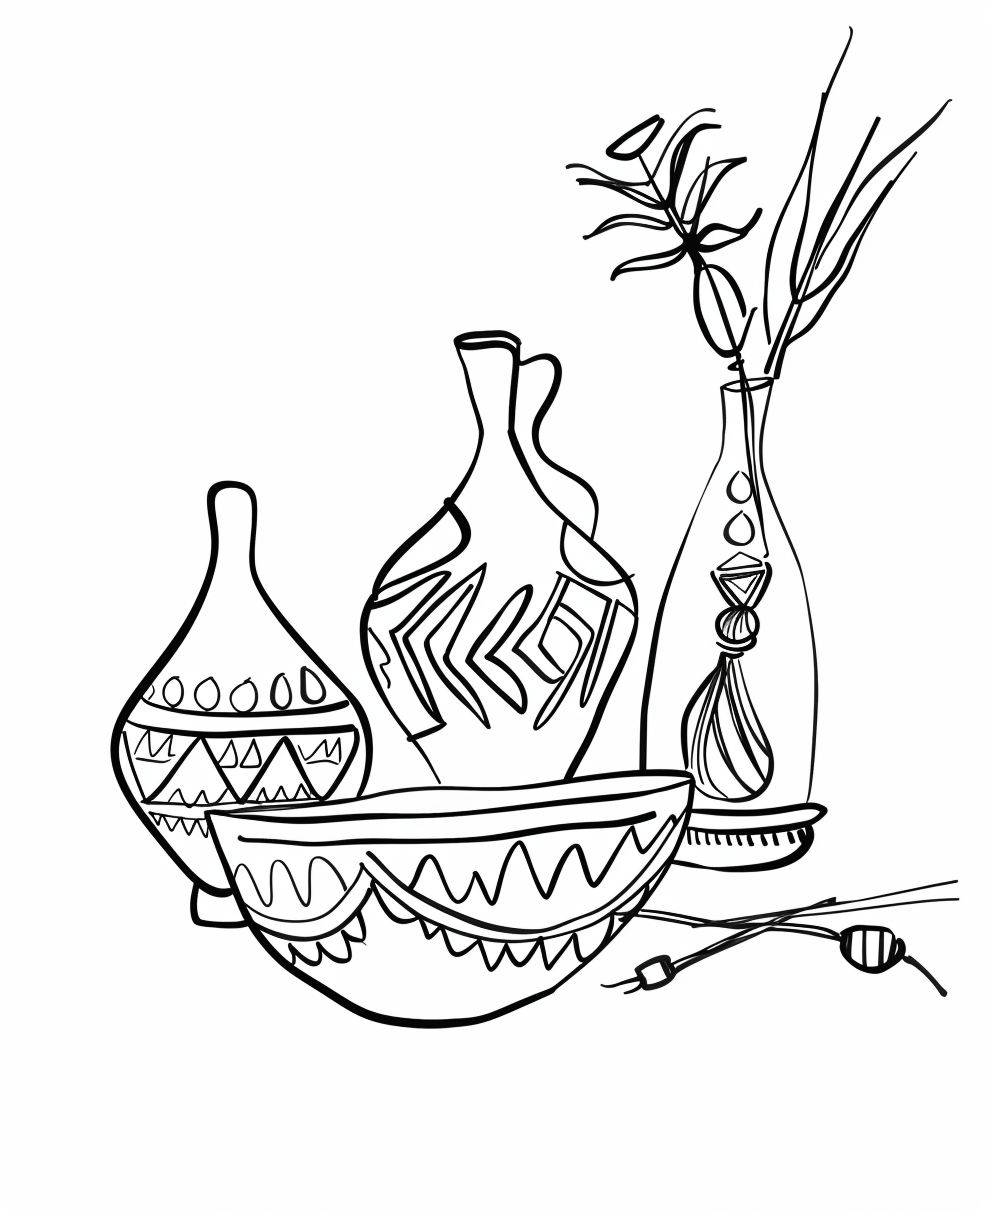 Simple thick line drawing of boho objects